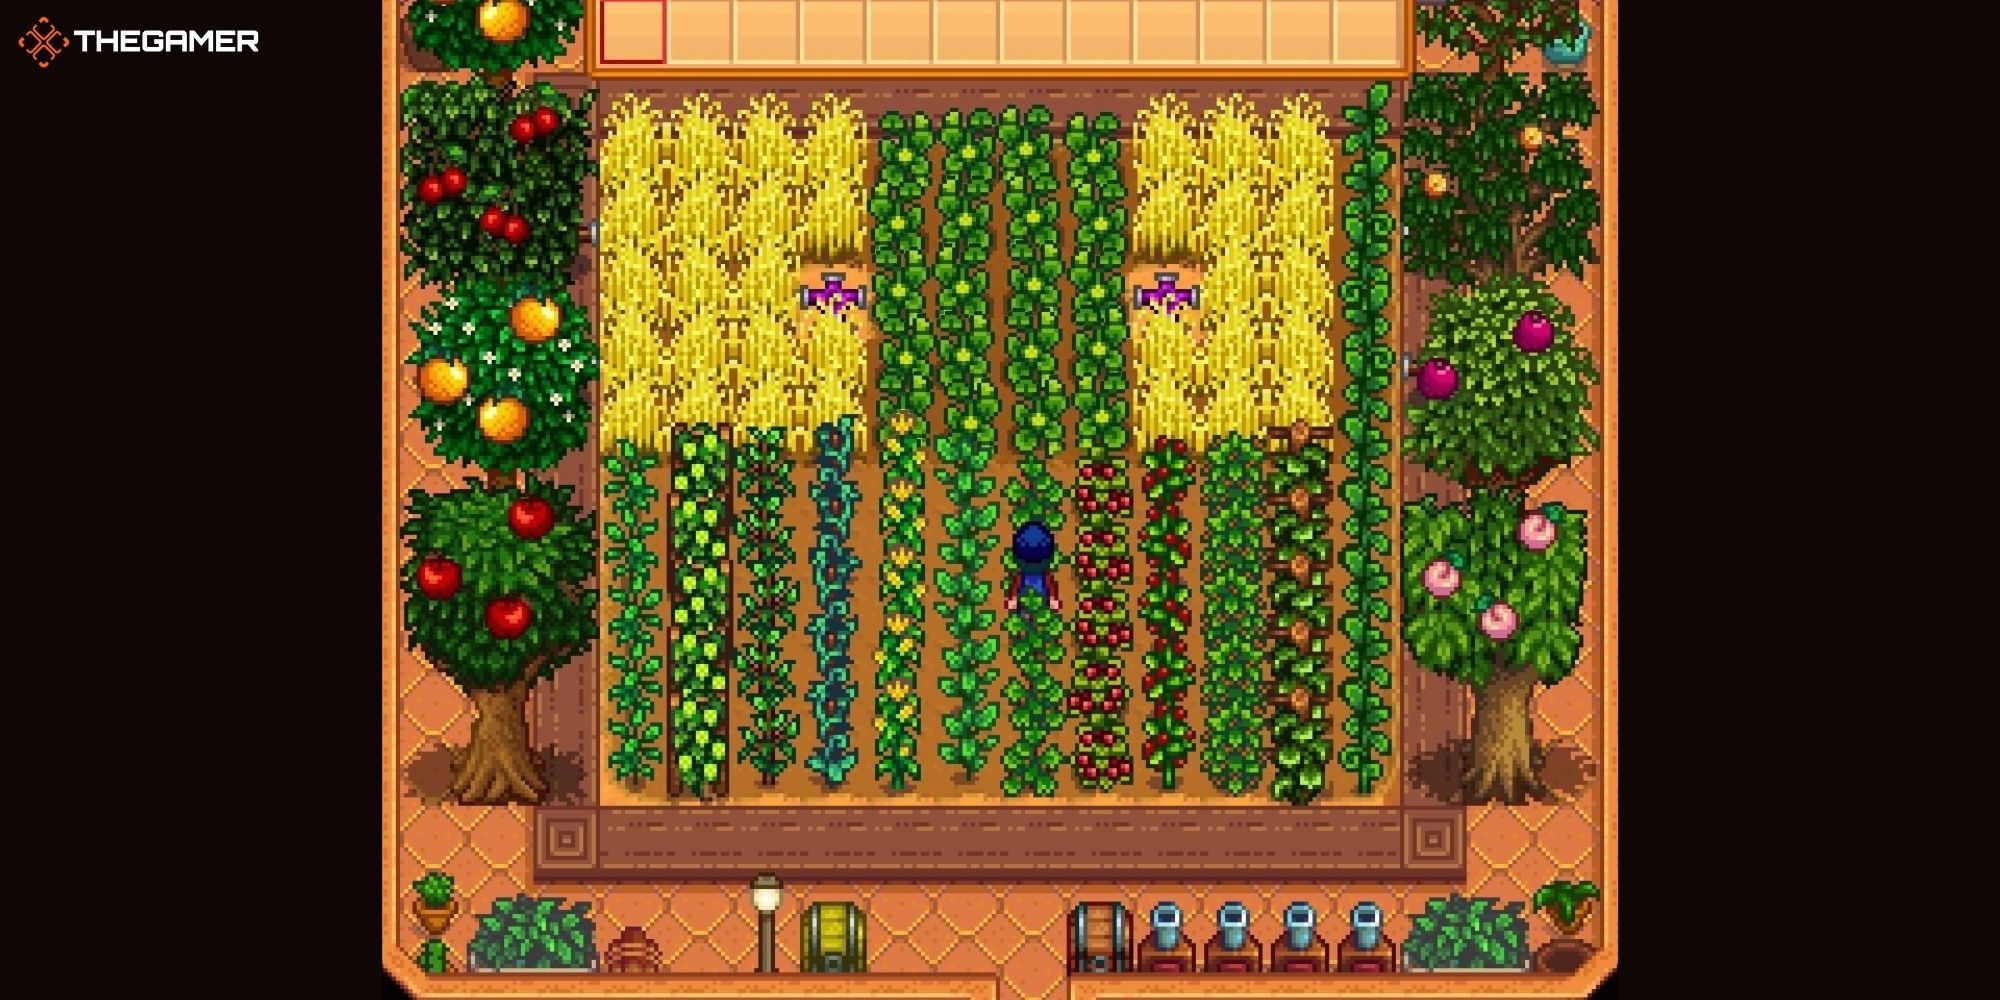 Stardew Valley: The player stands in the middle of the Greenhouse interior with a diverse range of plants